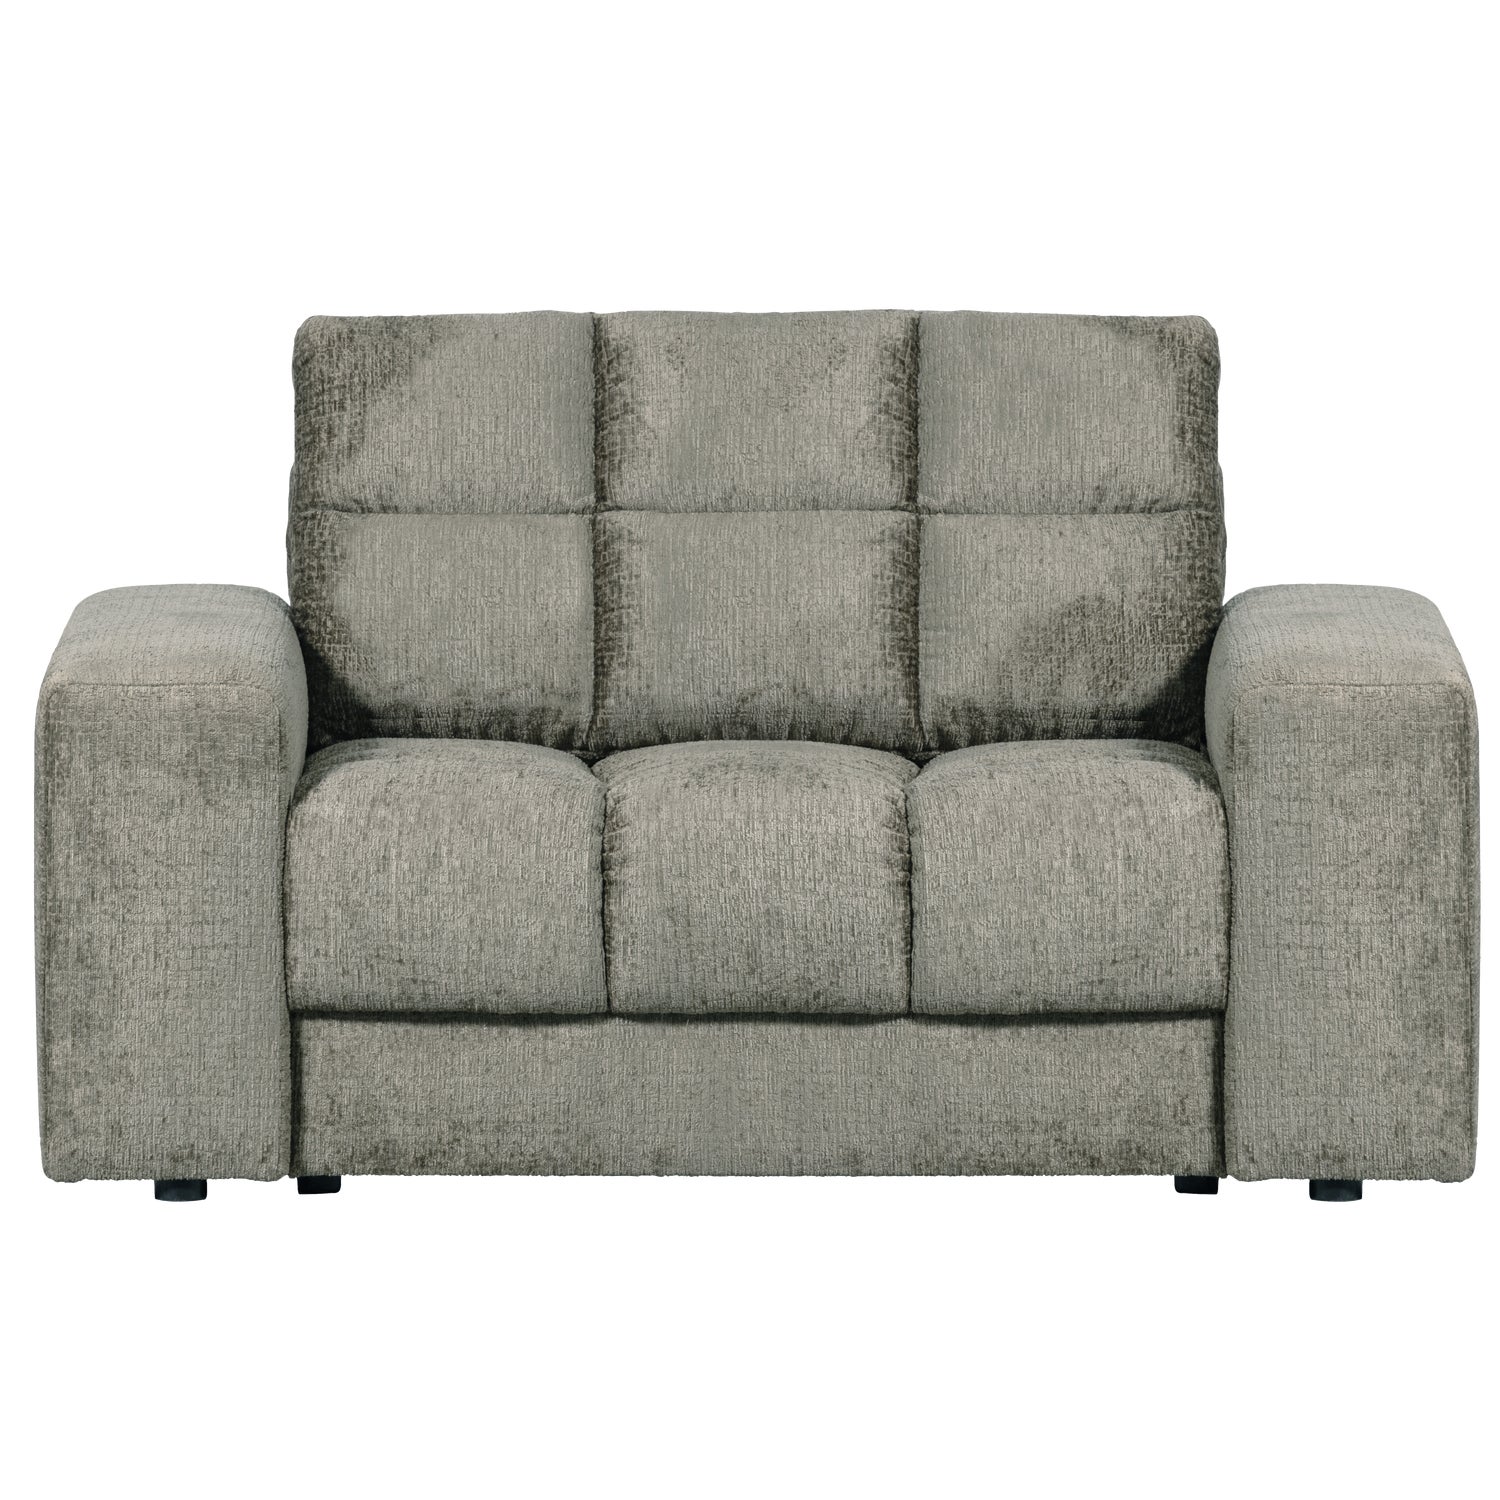 379006-FR-01_VS_WE_second_date_loveseat_structure_velvet_frost.png?auto=webp&format=png&width=1500&height=1500